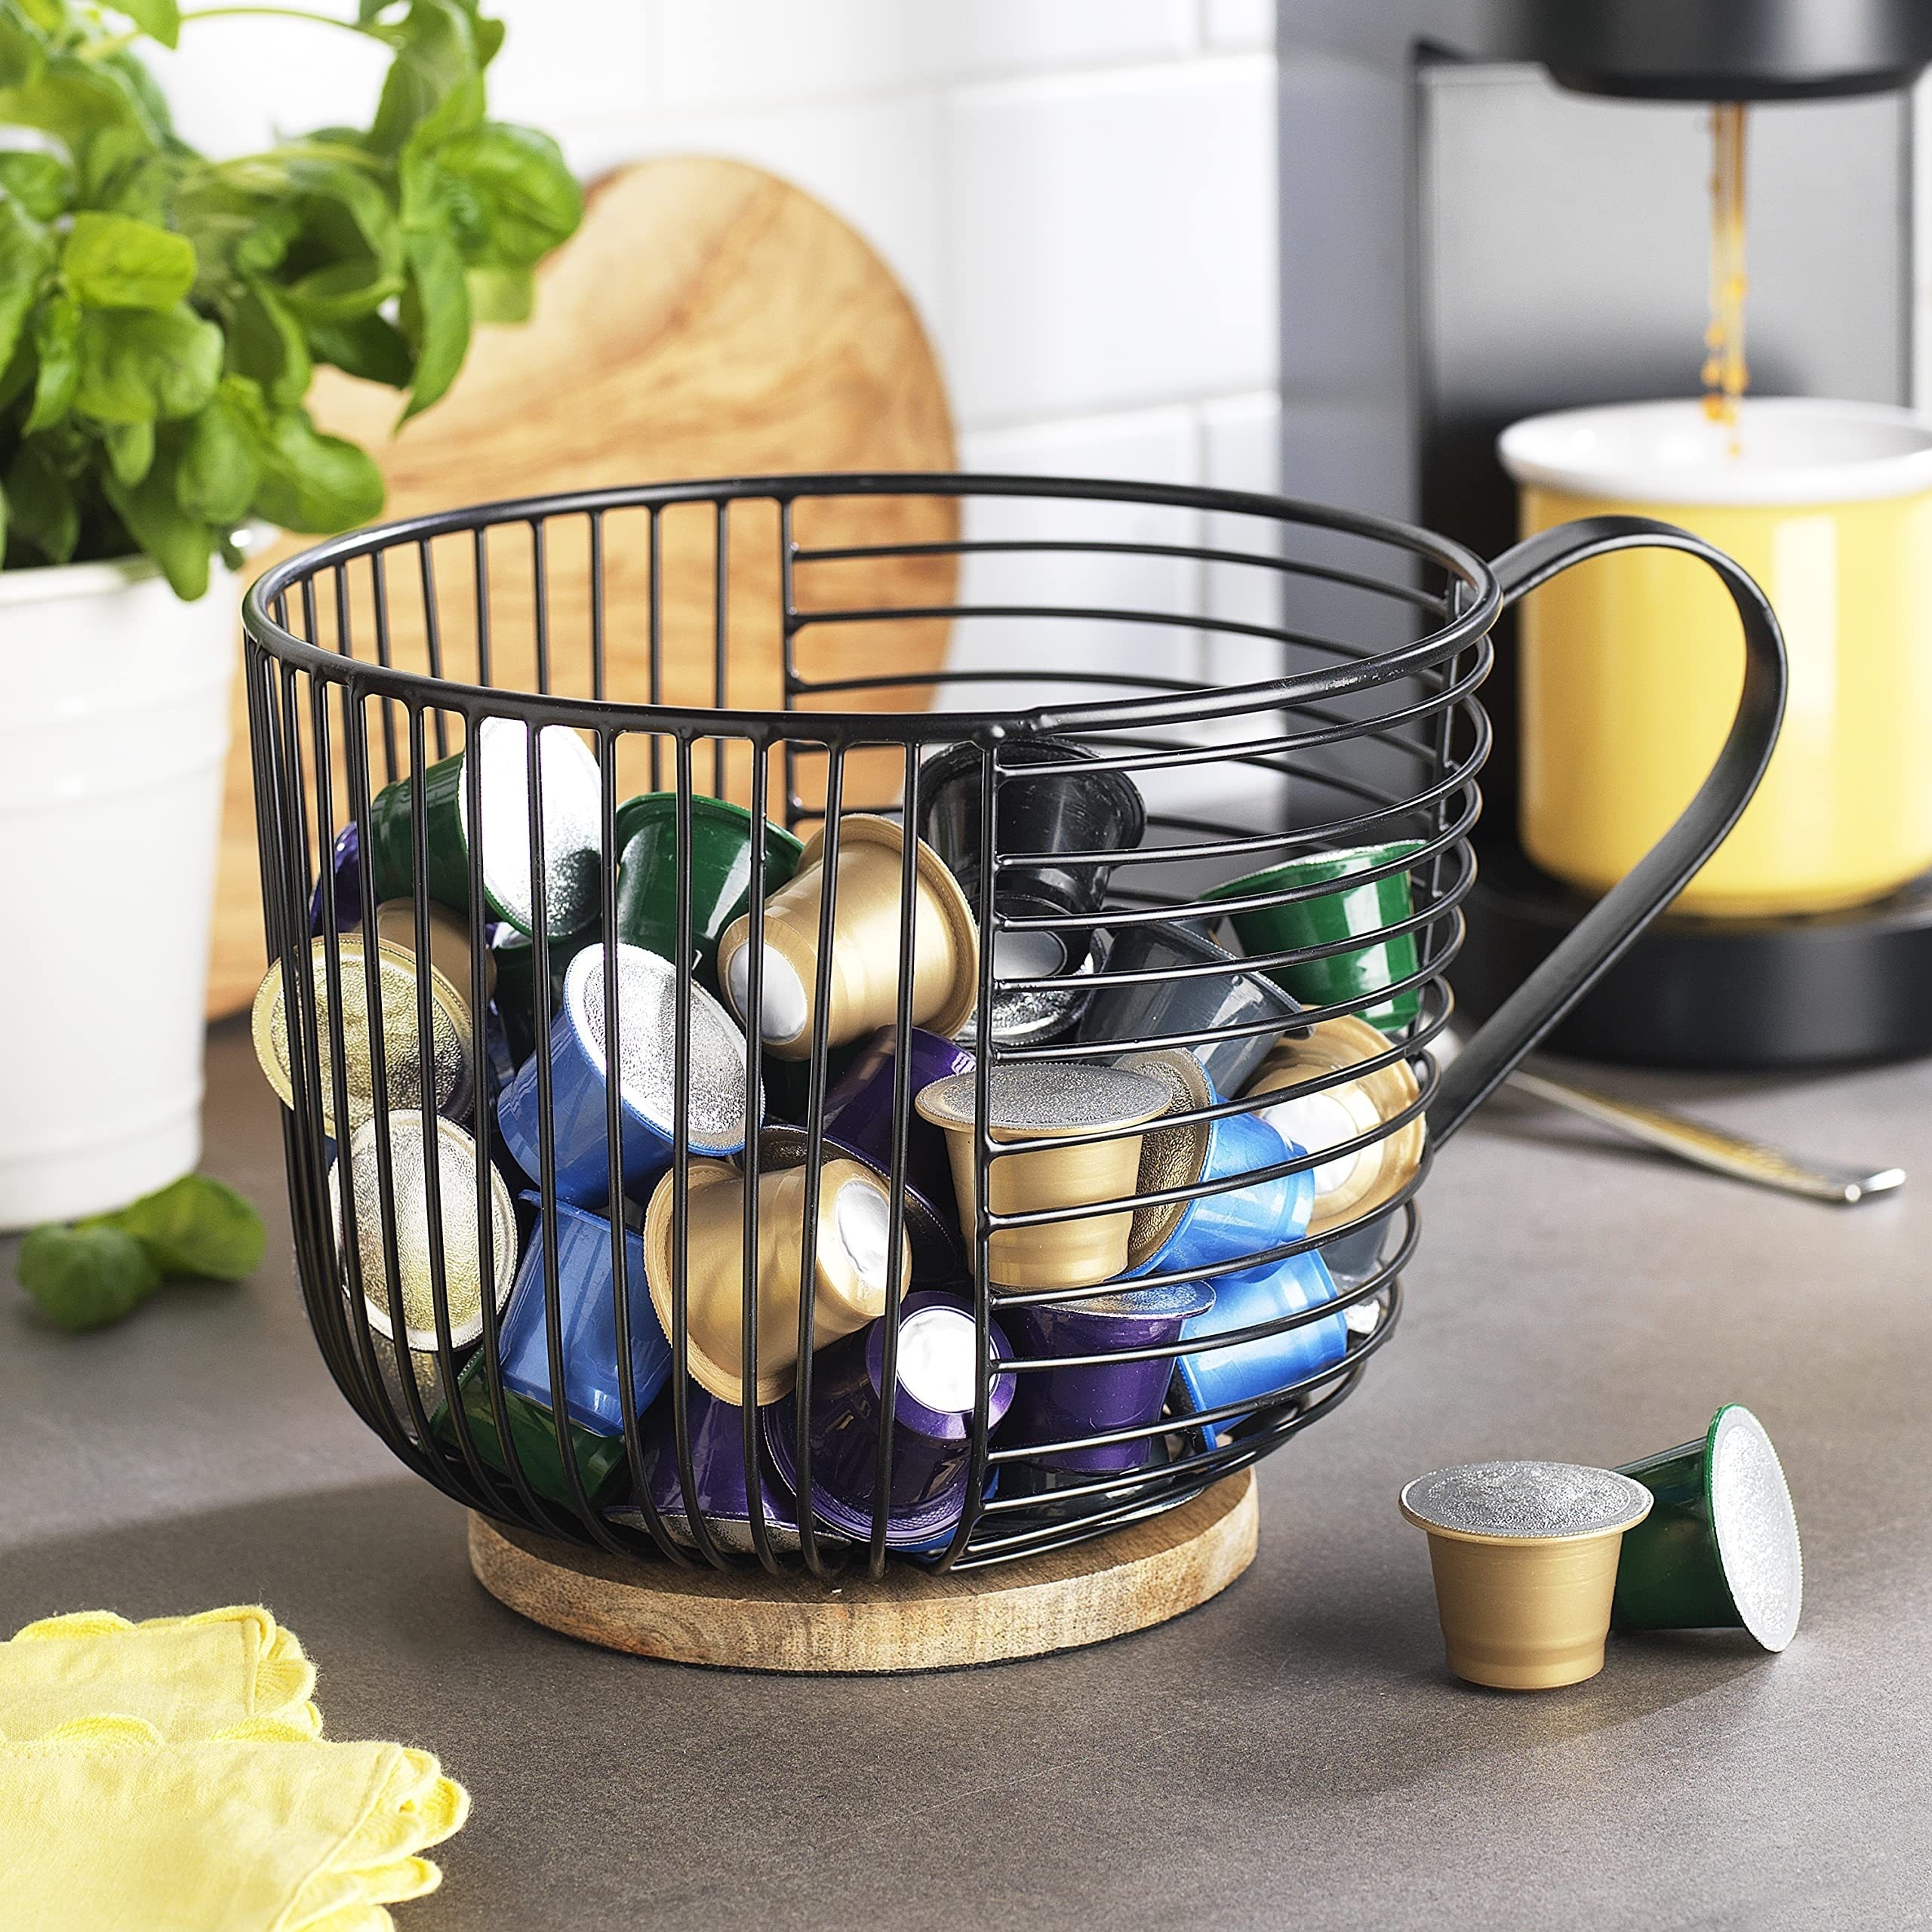 

1pc Coffee Pod Holder - Large Capacity Black Wire Kup Storage Basket With Wooden Base - Modern Coffee Basket Decor For Kitchen Countertop/bar, For Coffee Pods & Espresso Capsules Supplies